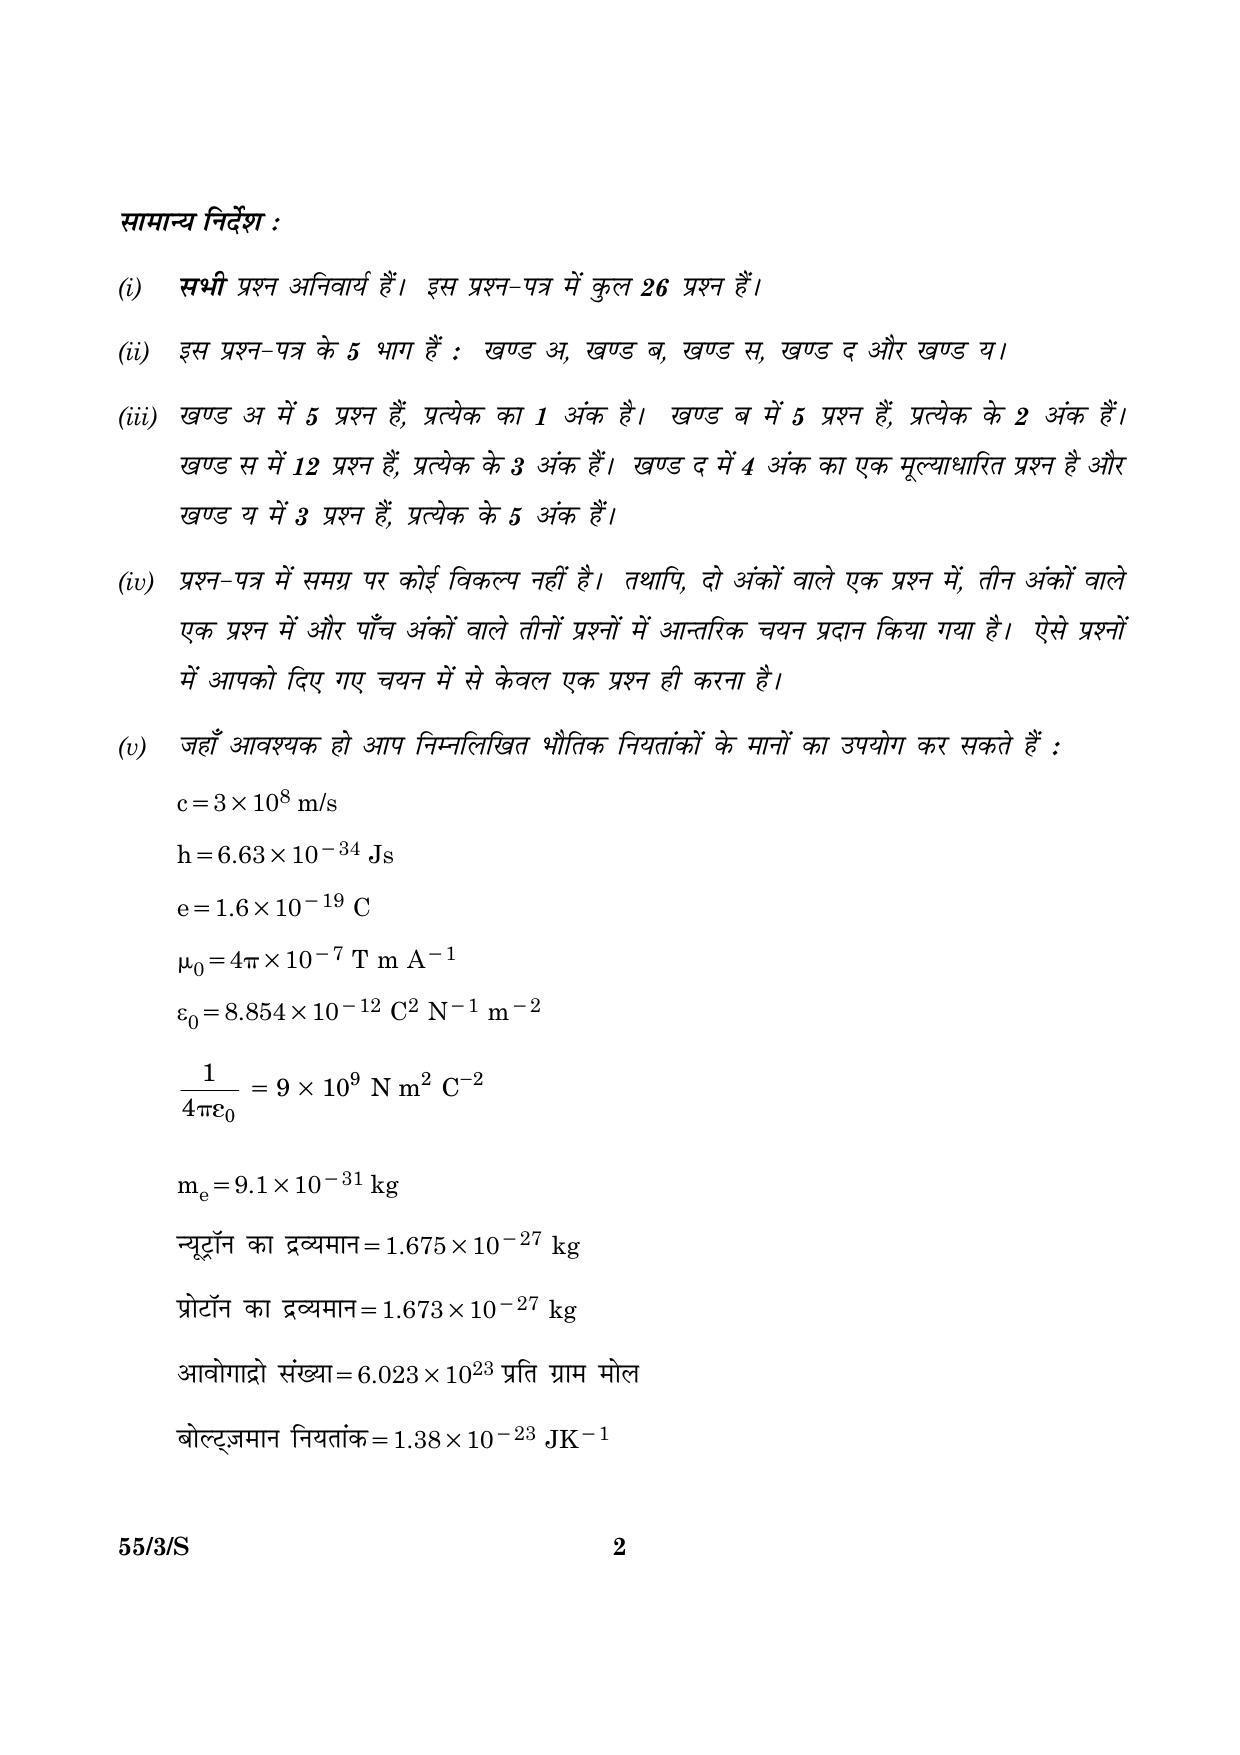 CBSE Class 12 055 Set 3 S Physics Theory 2016 Question Paper - Page 2